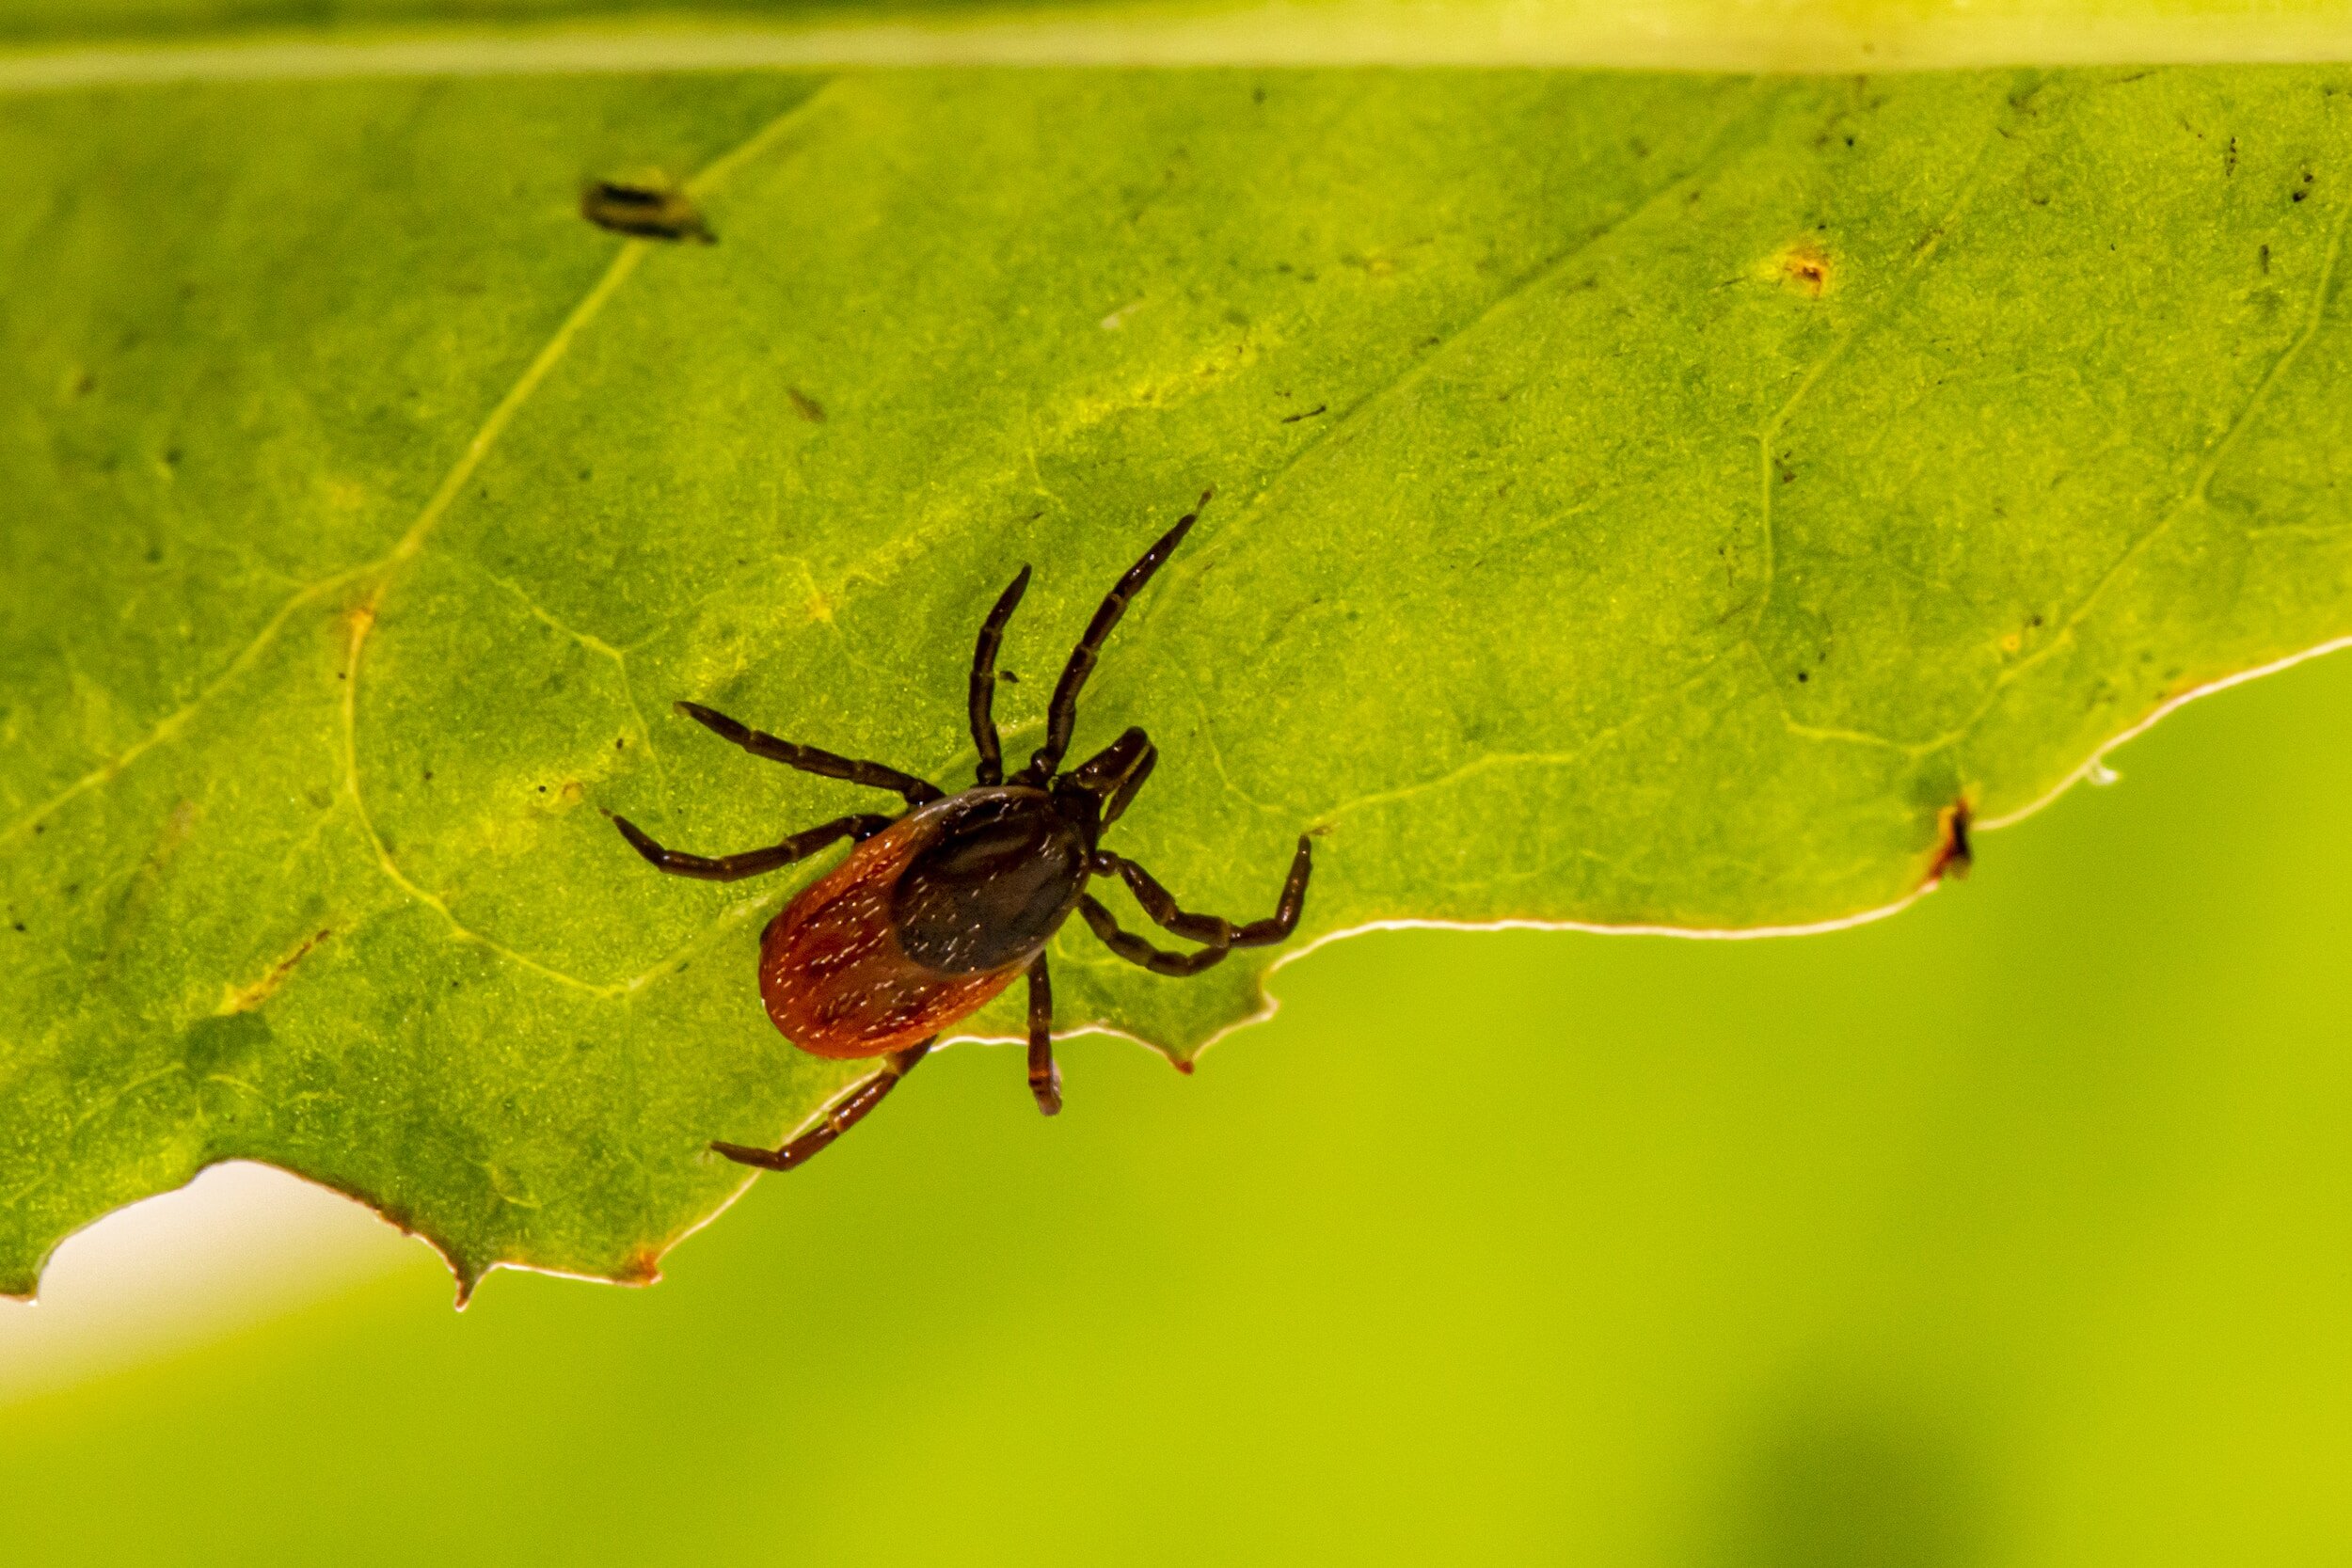 Tick Borne Meat Allergy May Have Impacted Nearly Half A Million People